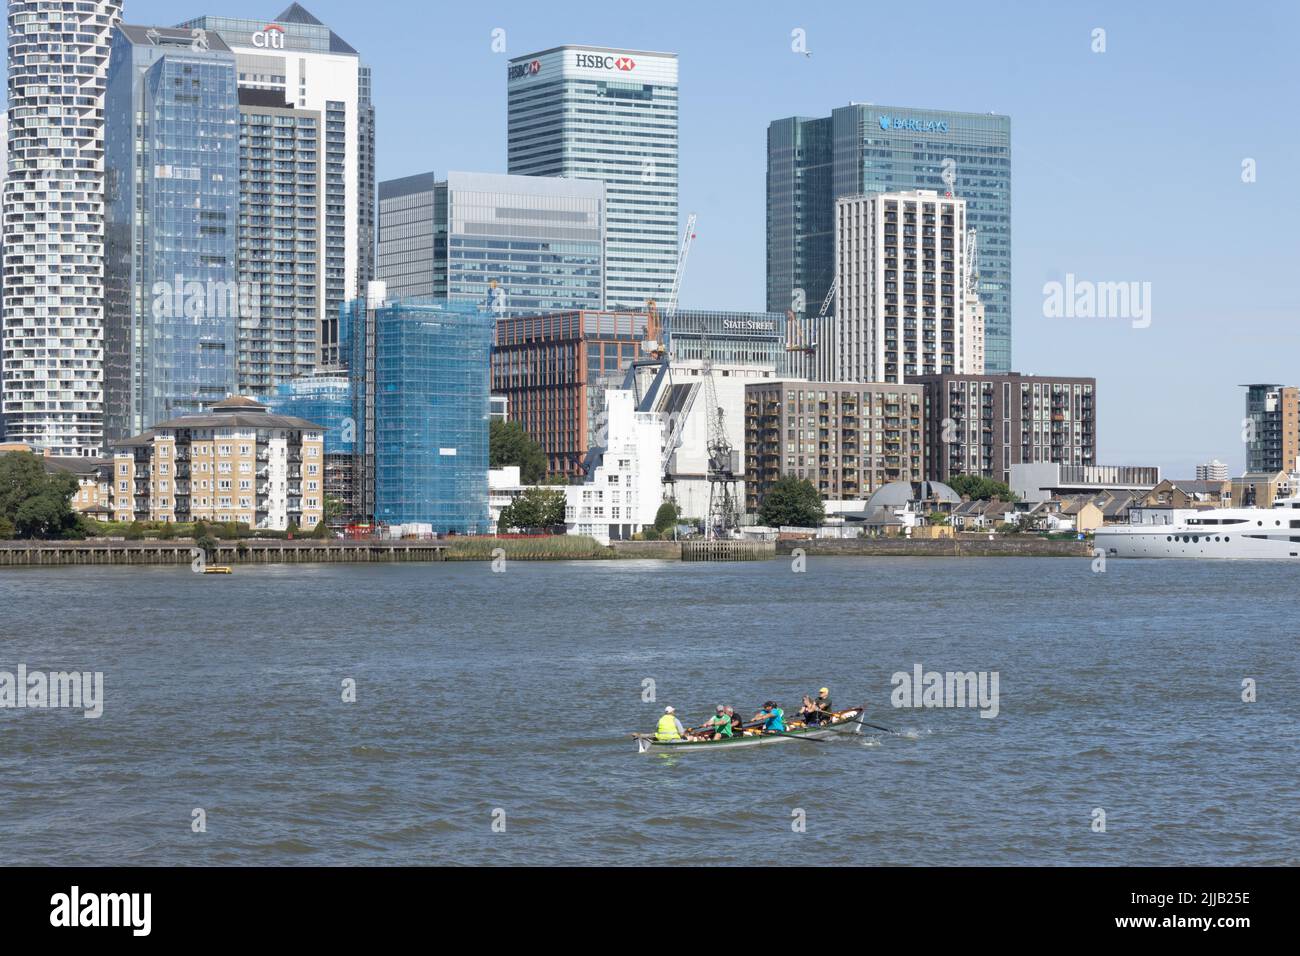 Vogatori in dingy con superyacht Stardust off Canary Wharf, City of London, UK Foto Stock